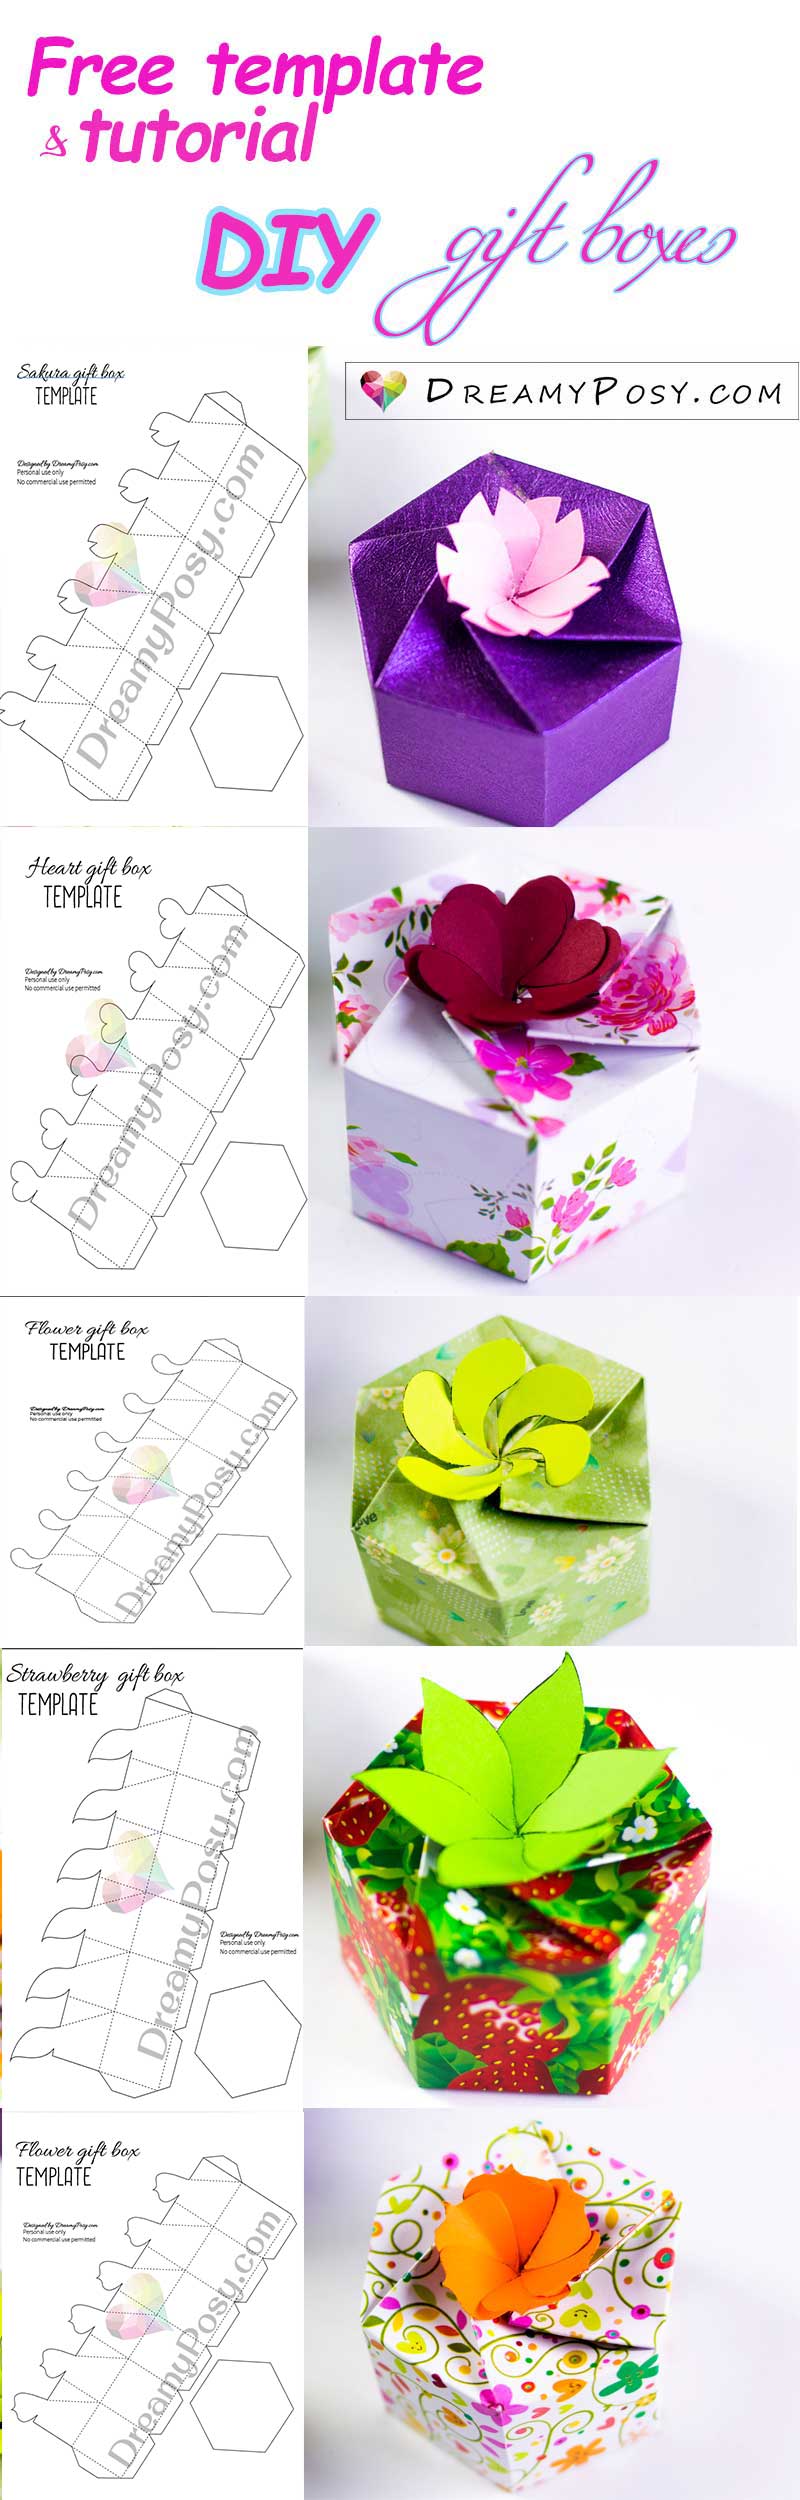 personalized gift boxes, free template, gift box, diy gift box